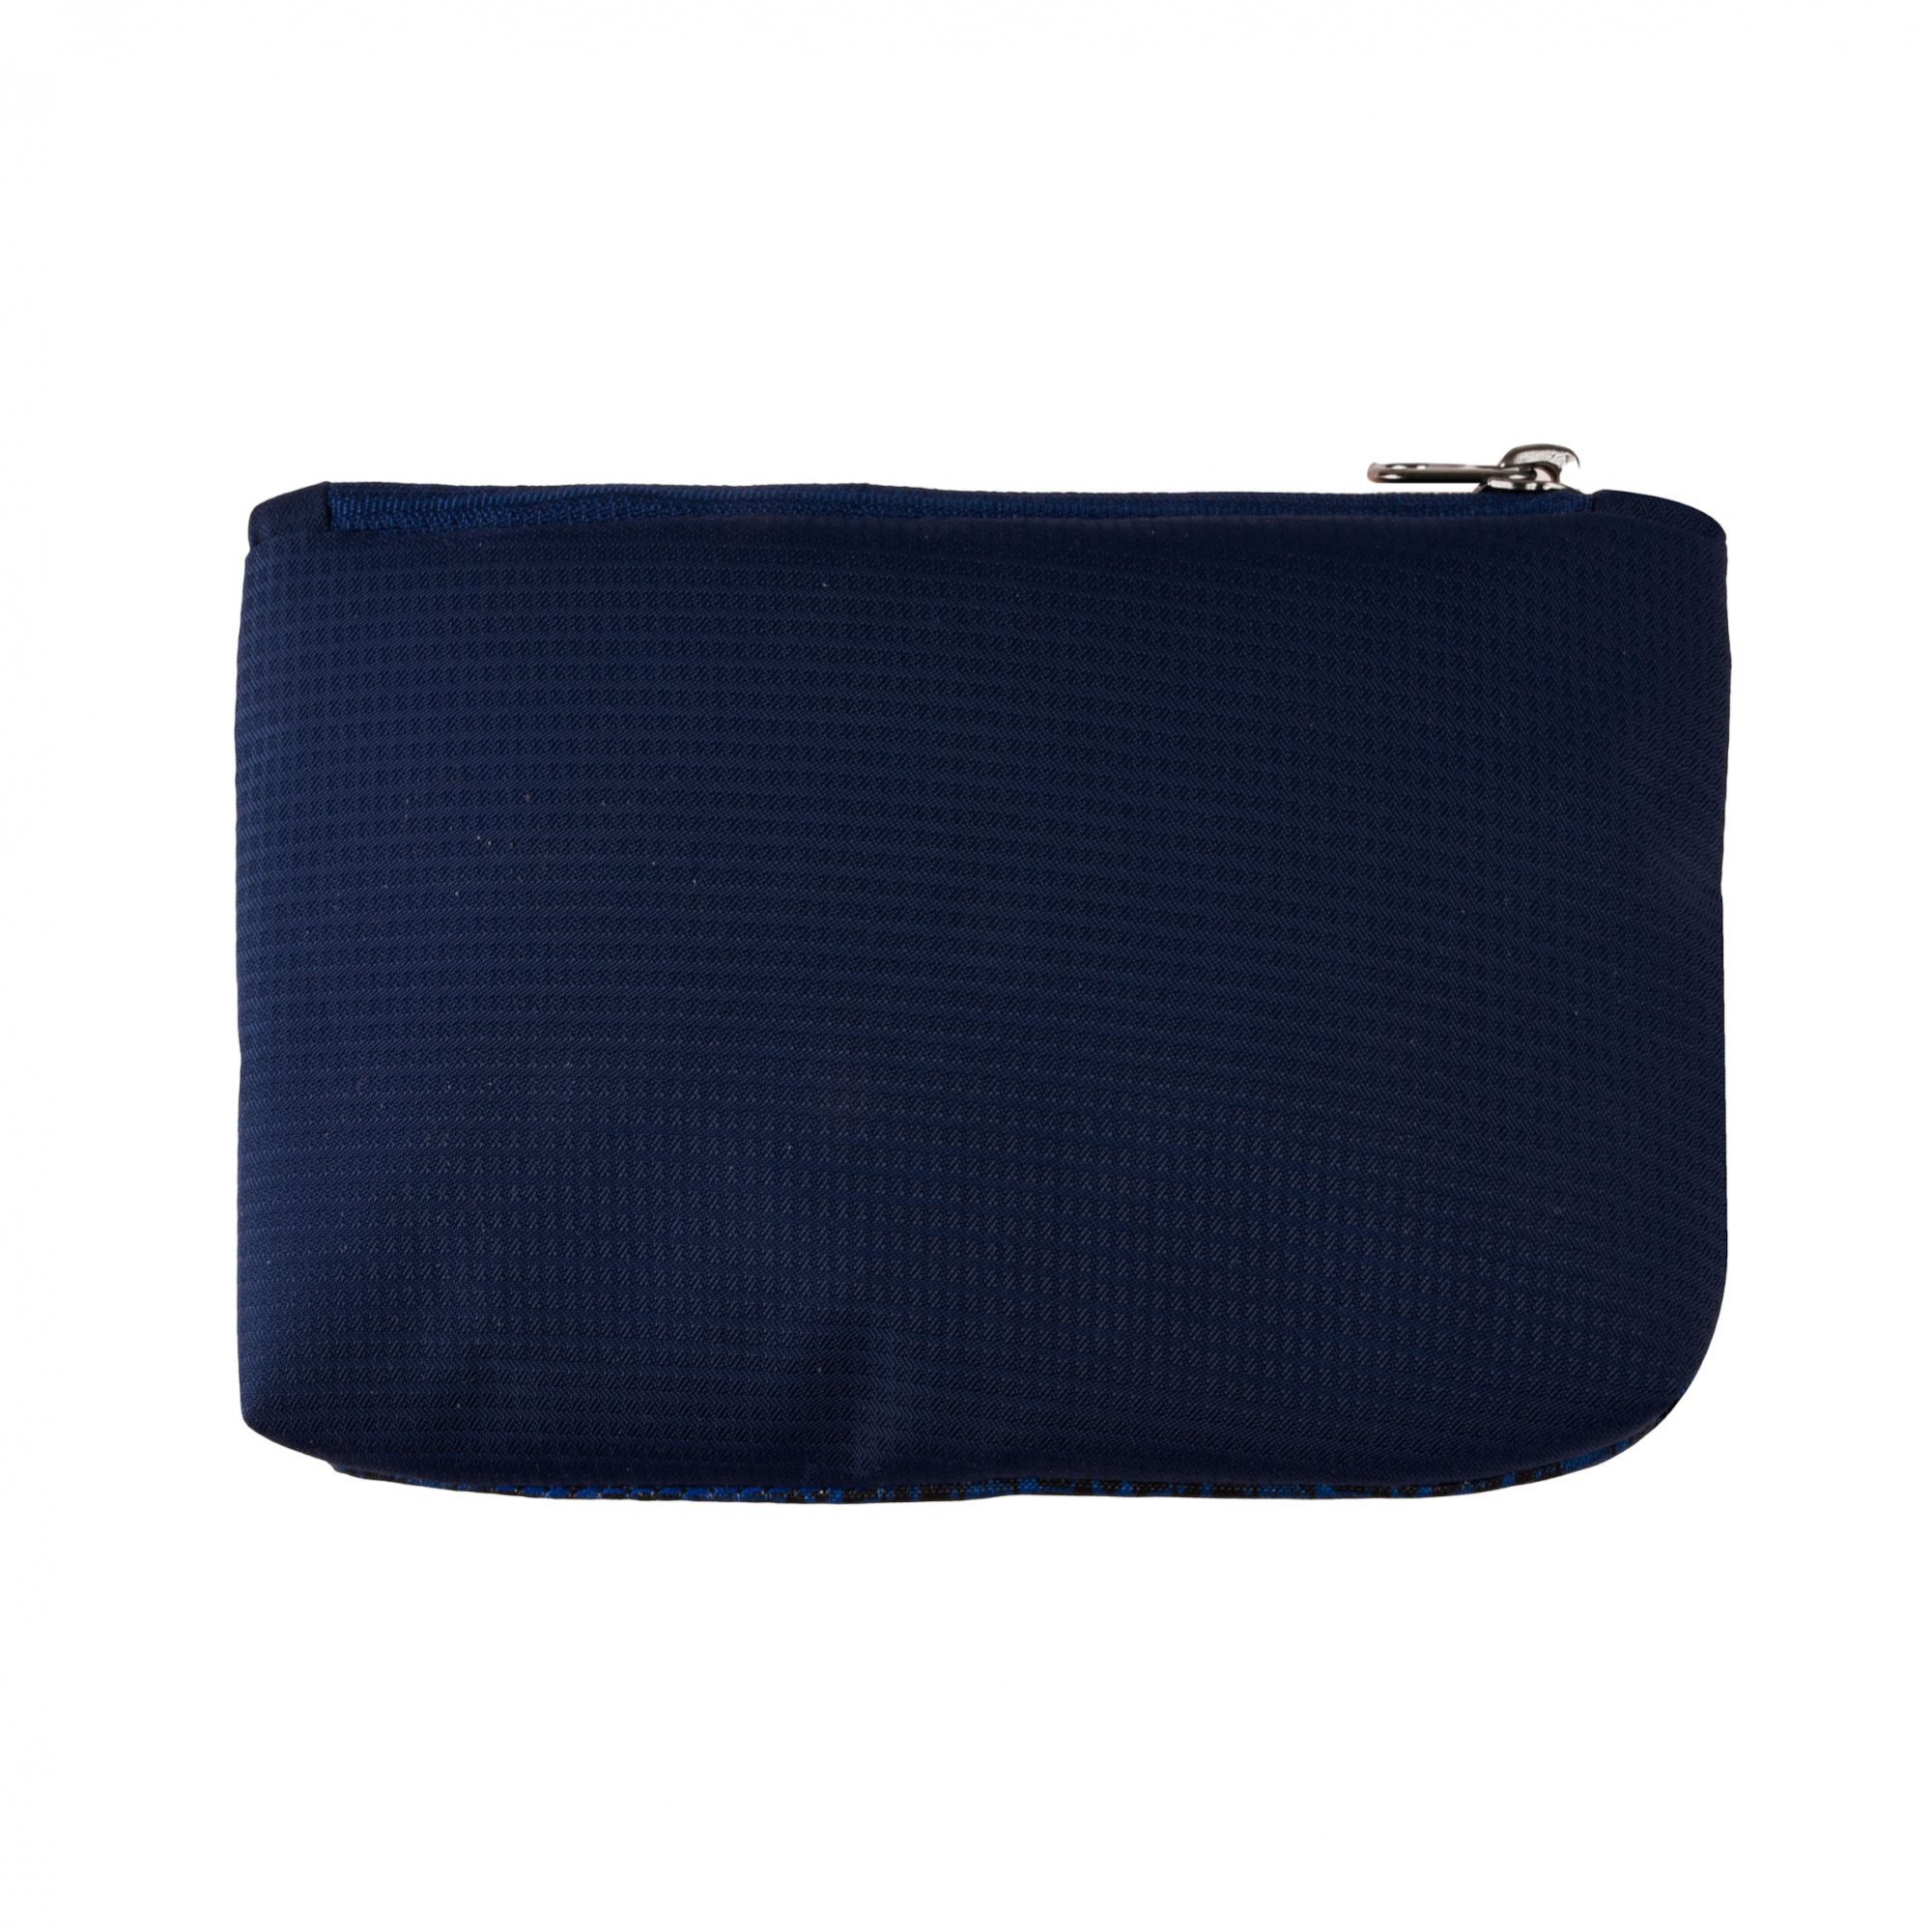 Kuber Industries Pencil Pouch | Square Stationary Pouch | Pen-Pencil Box for Kids | School Geometry Pouch | Pencil Utility Bag | Zipper Pencil Organizer | Navy Blue & Red